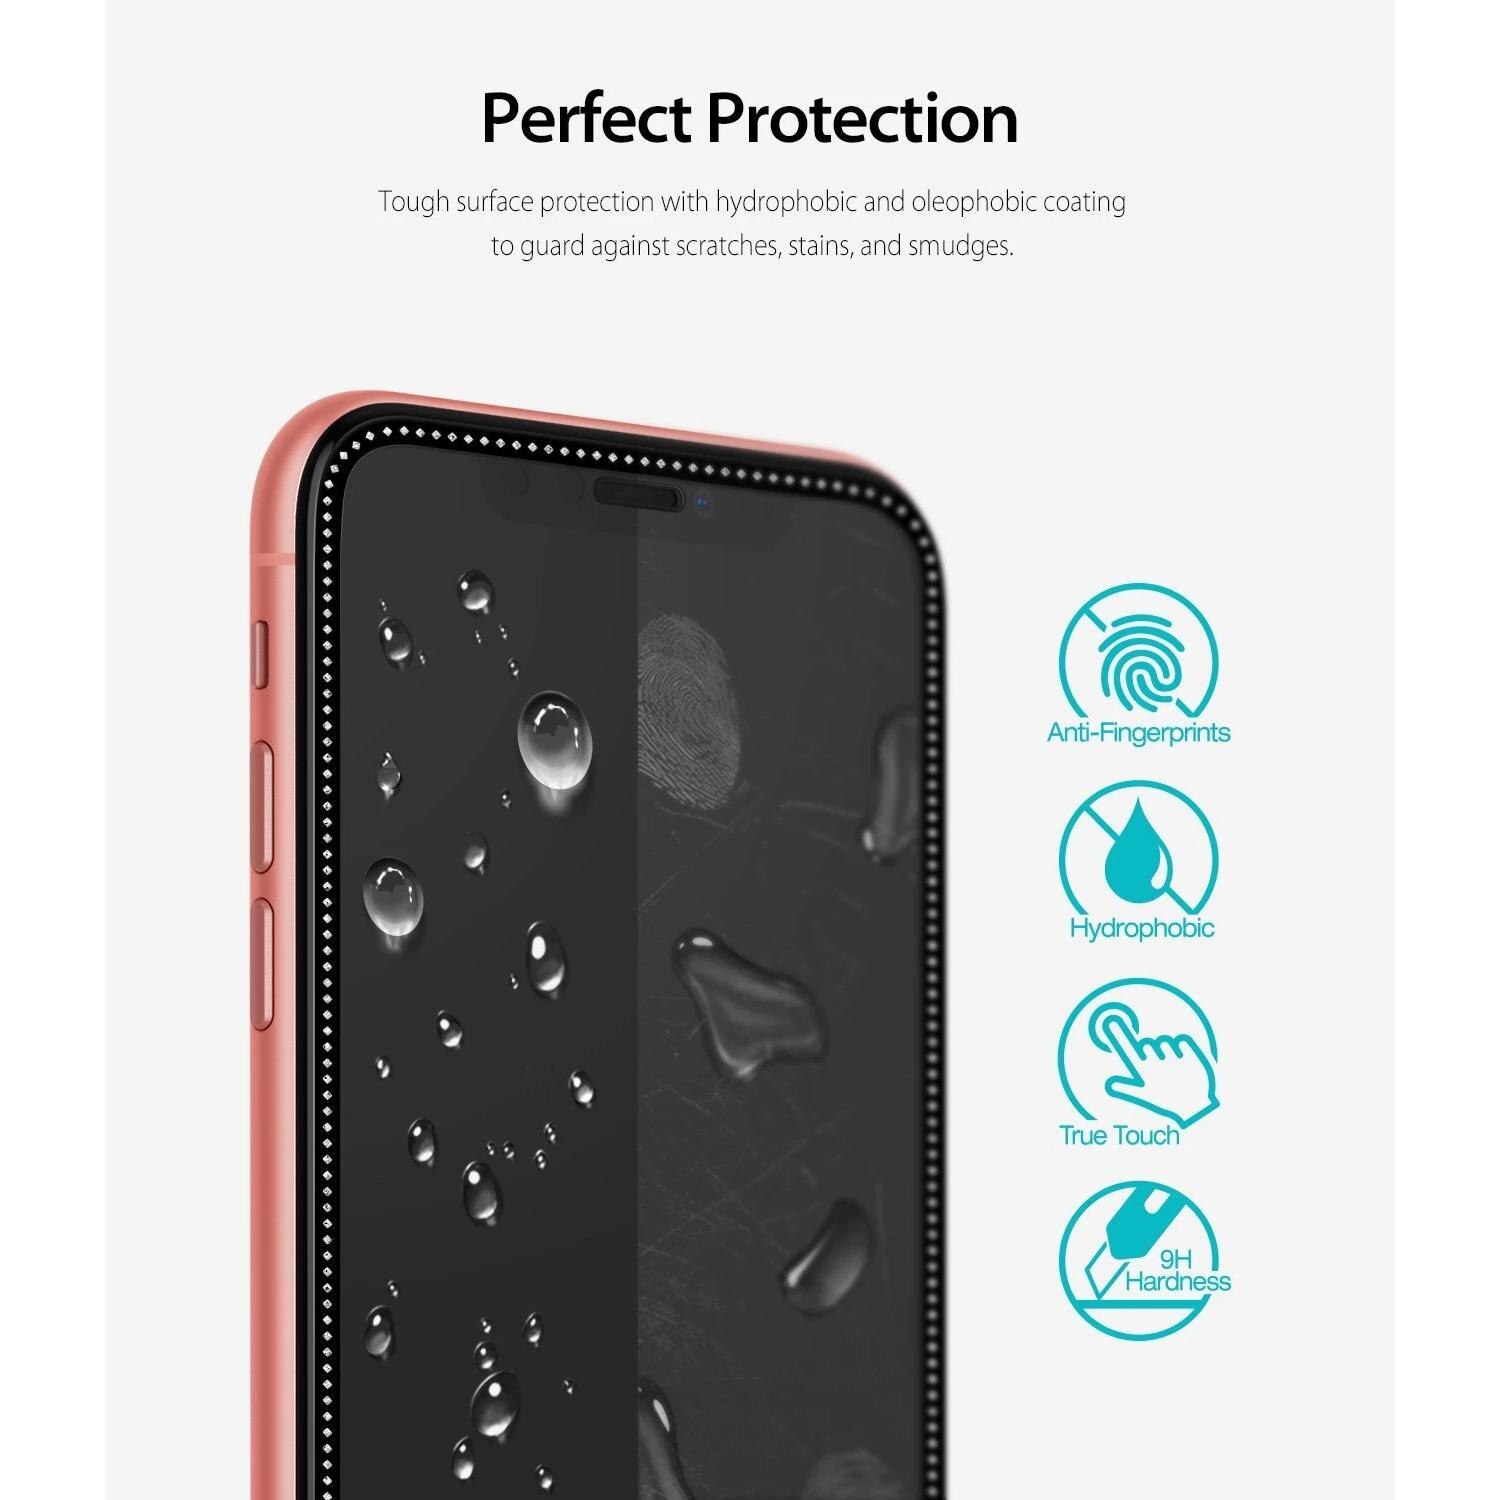 Invisible Defender Glass Jewel Edition iPhone 11/XR Zwart